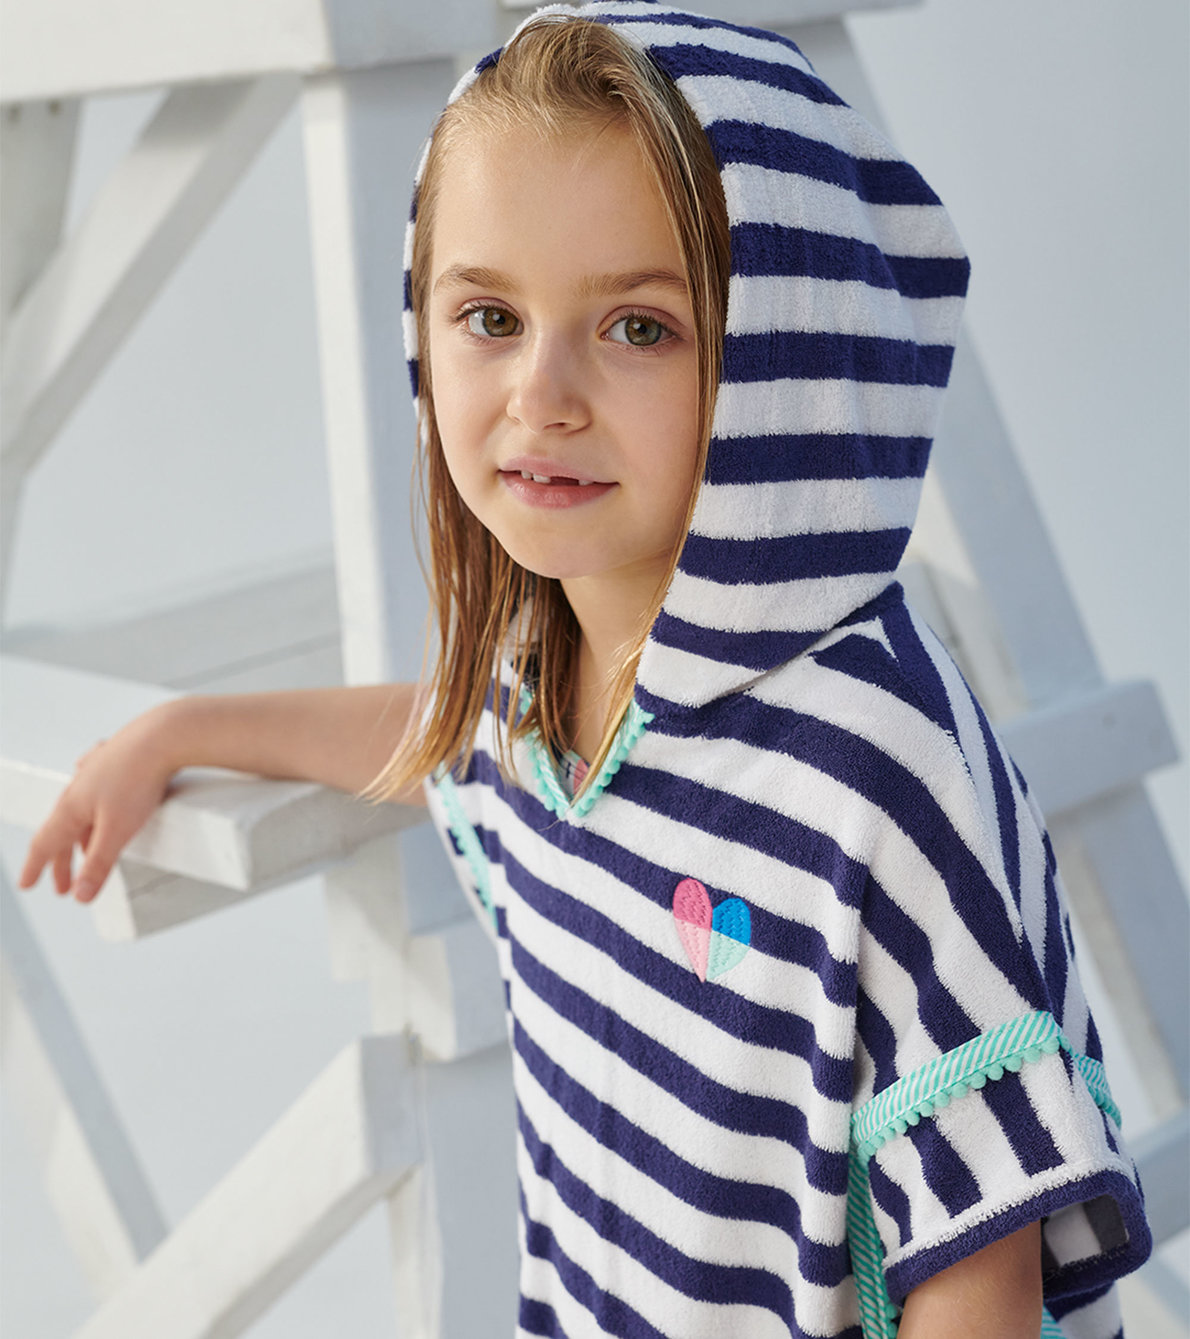 View larger image of Navy Stripes Hooded Terry Cover Up